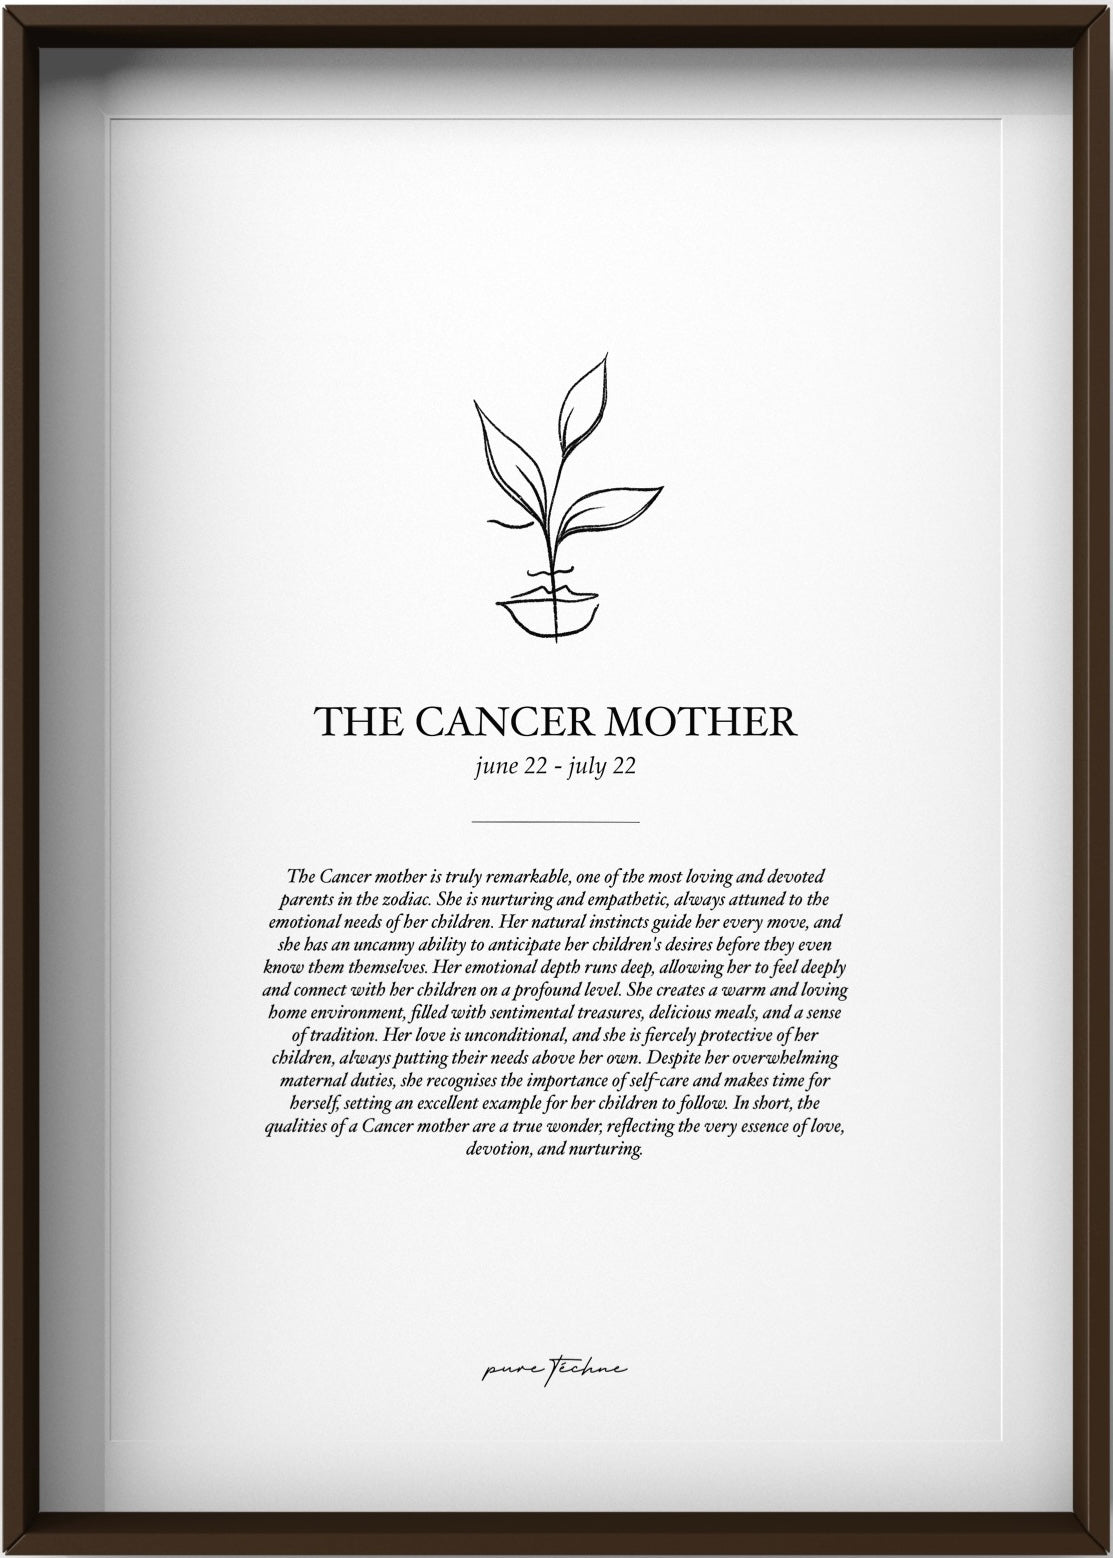 The Cancer Mother